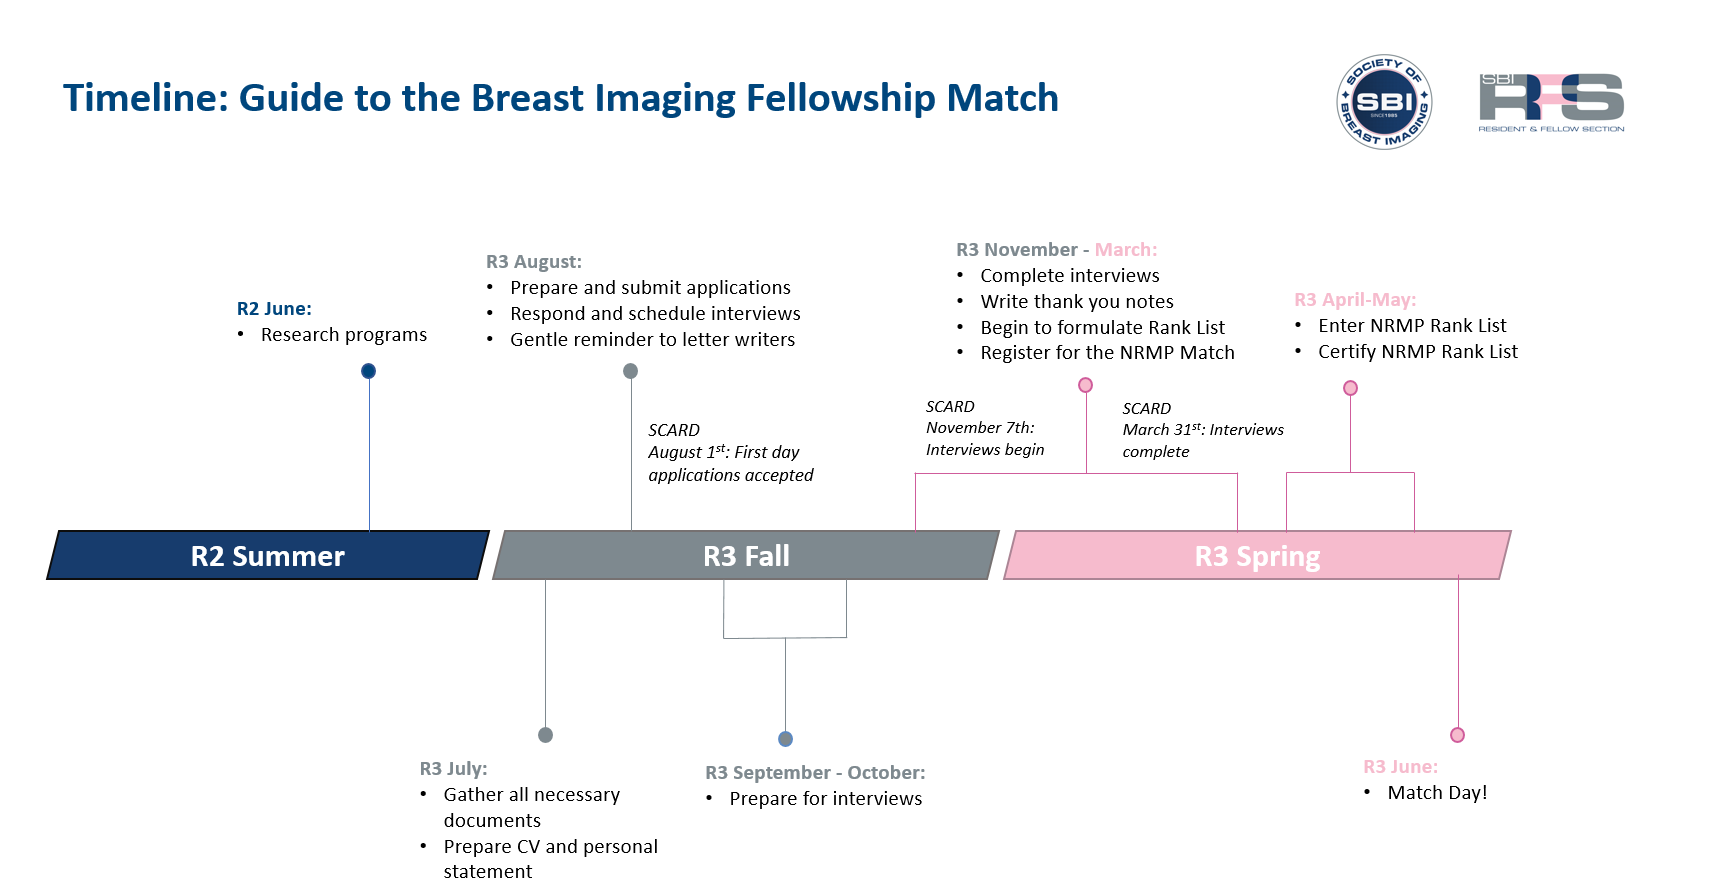 Timeline: Guide to the Breast Imaging Fellowship Match